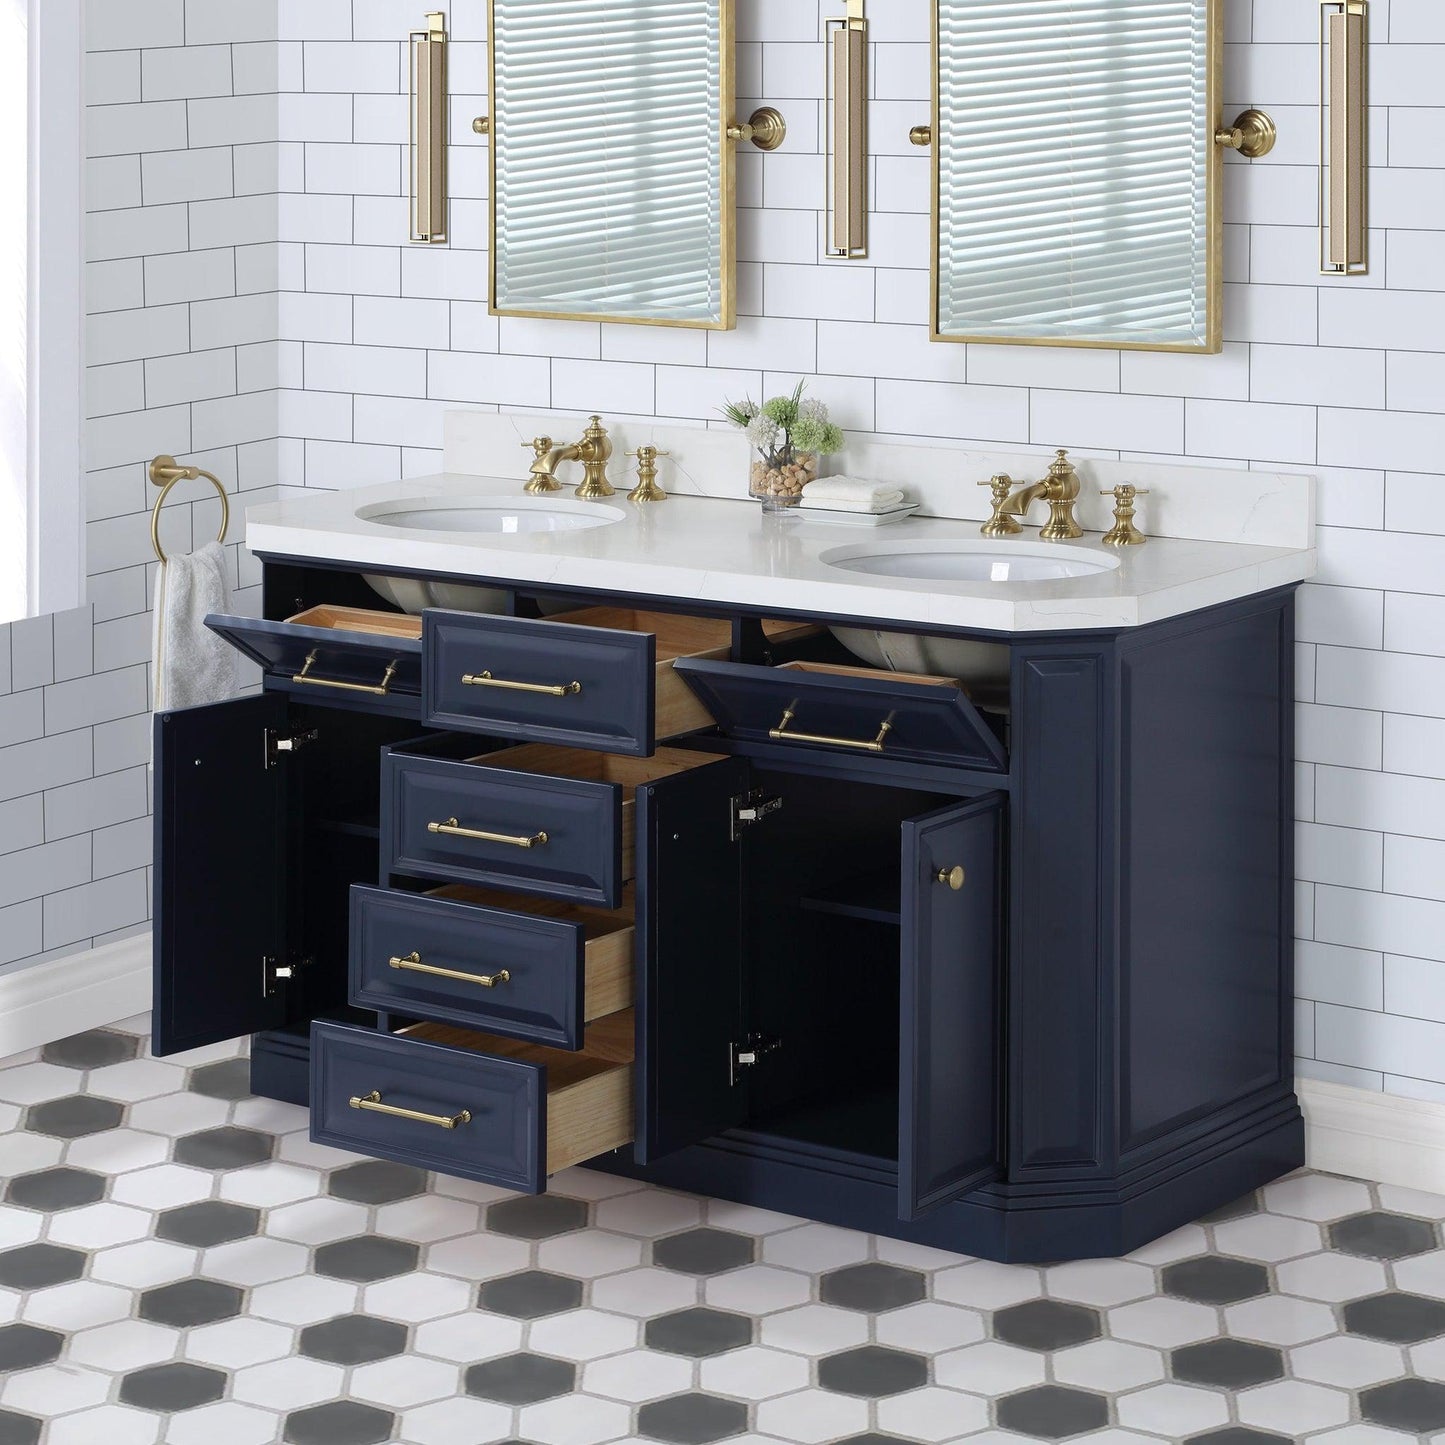 Water Creation Palace 60" Double Sink White Quartz Countertop Vanity in Monarch Blue with Waterfall Faucets